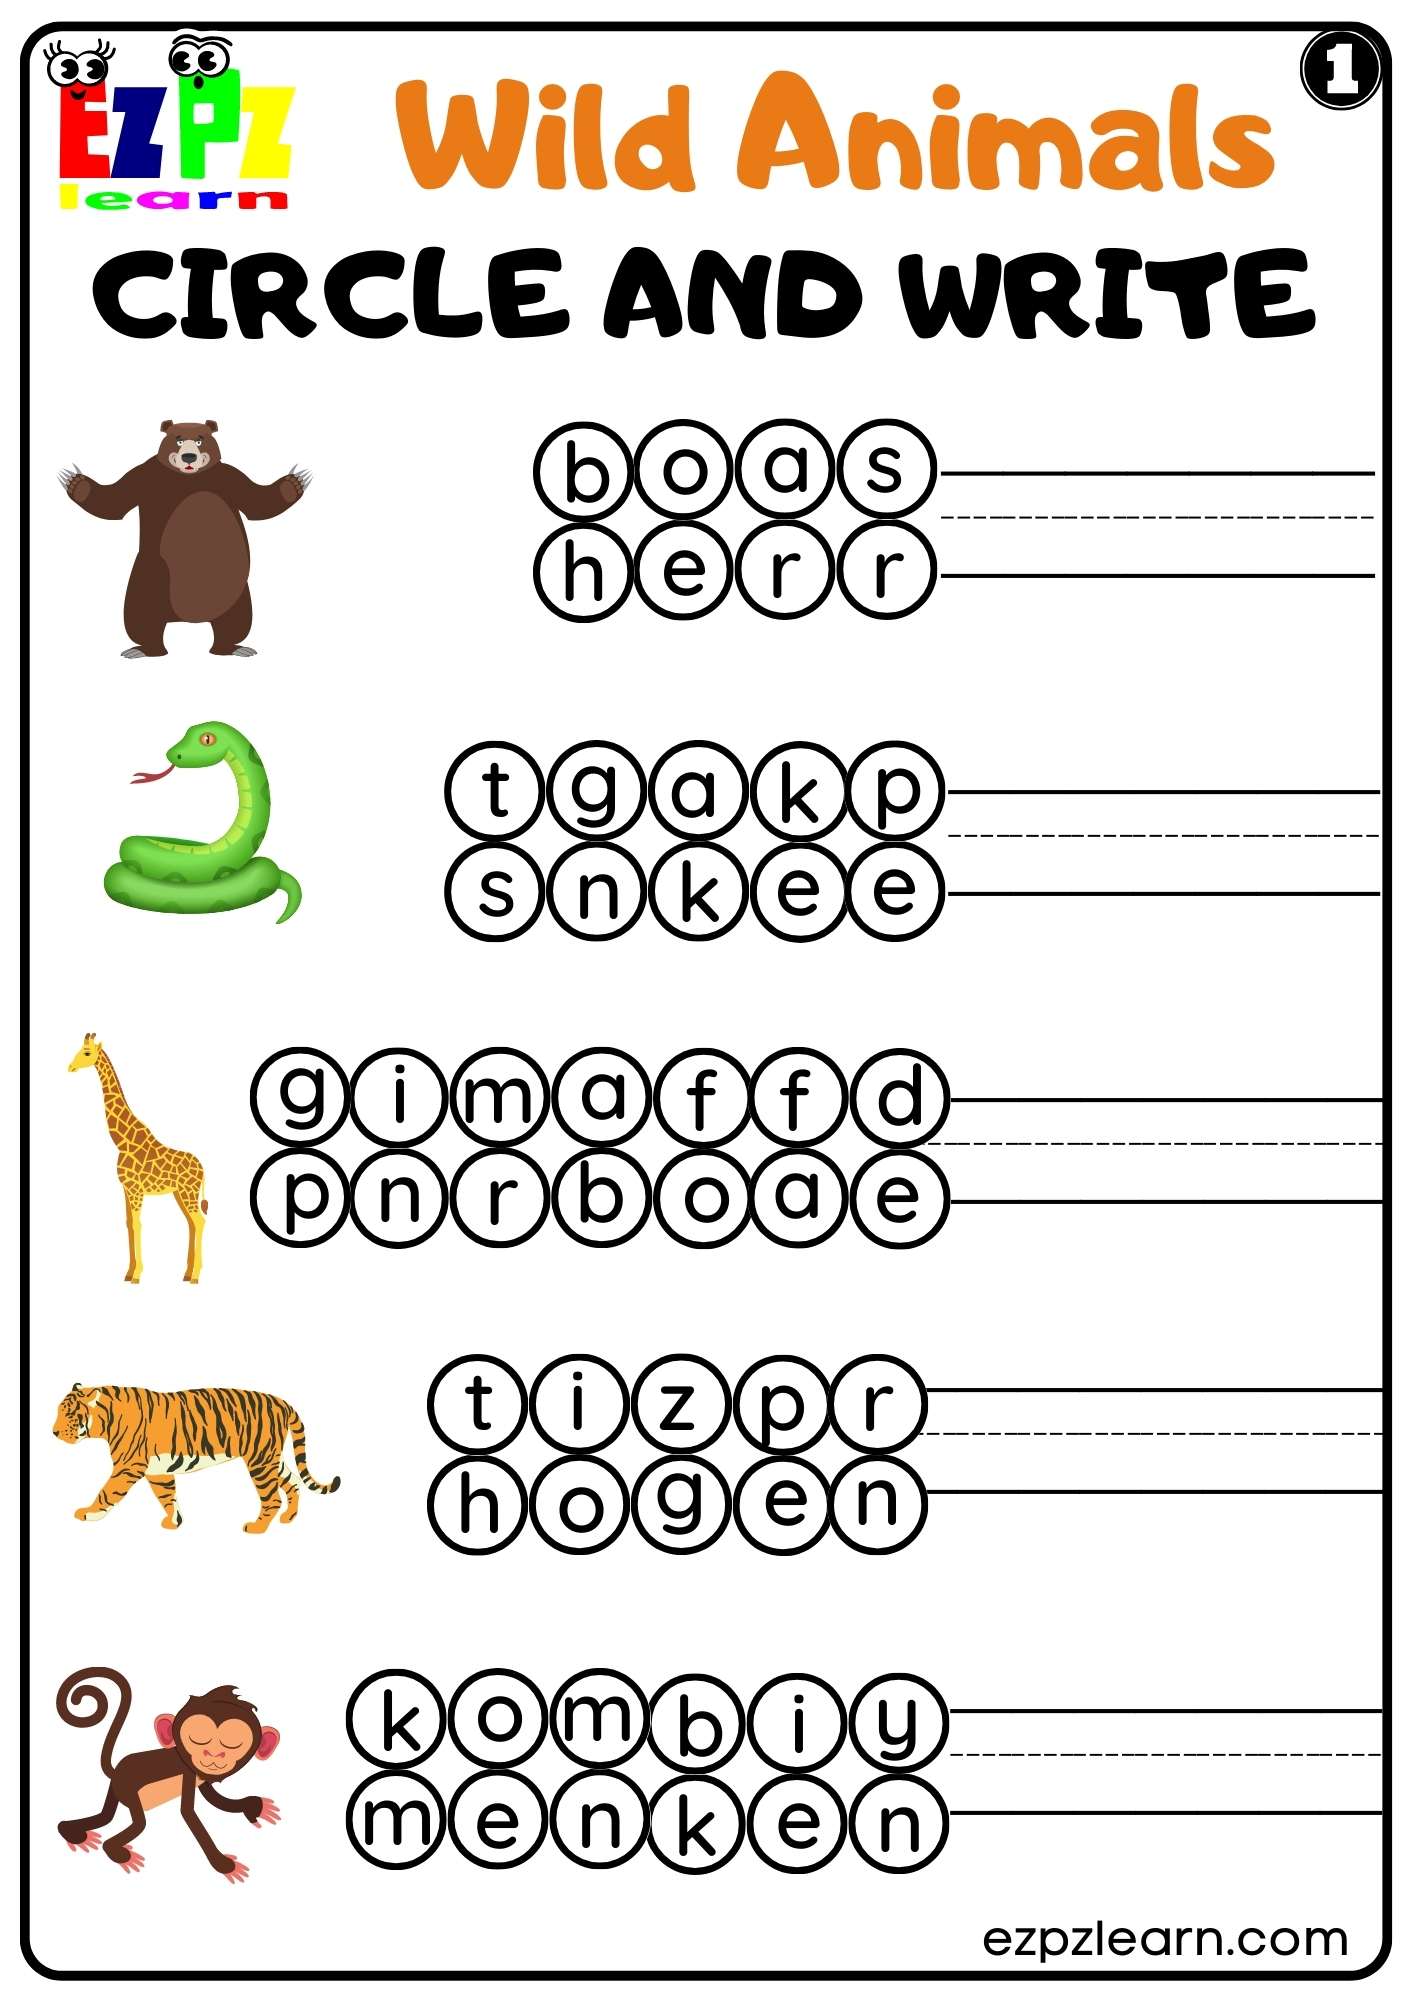 Wild Animals Circle and Write Set 1 For kids and ESL PDF Download -  